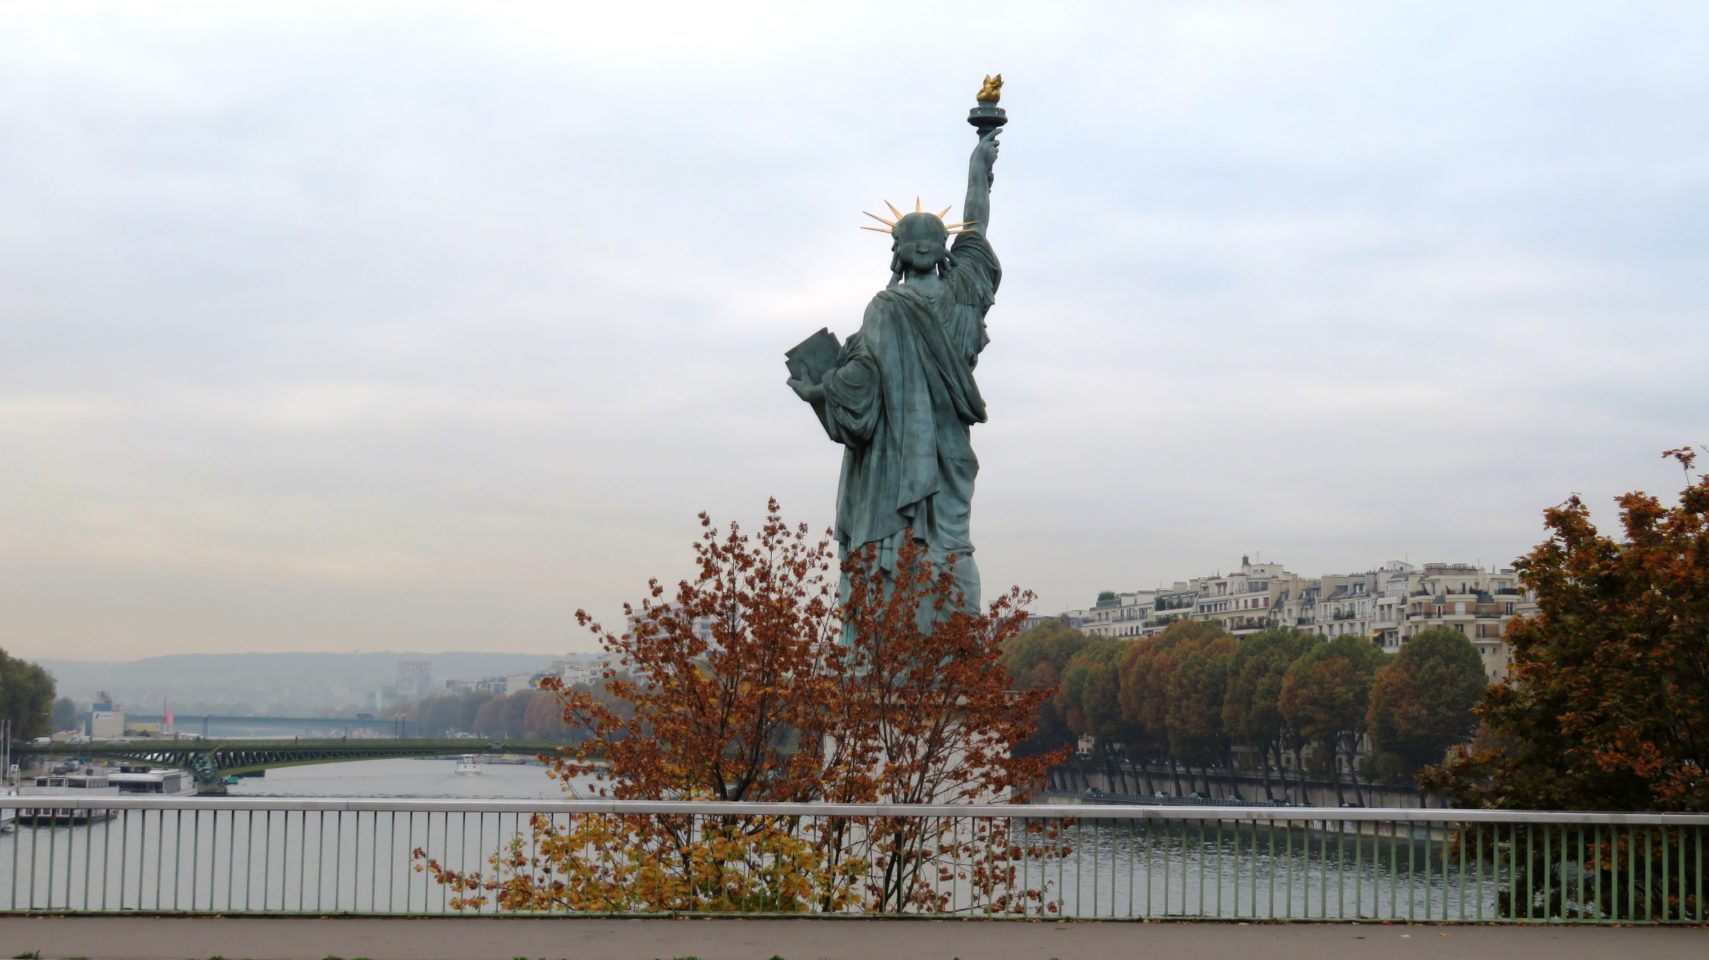 The Statue of Liberty greets visitors to Paris, France (Paris and Normandie AMAWaterways Cruise)